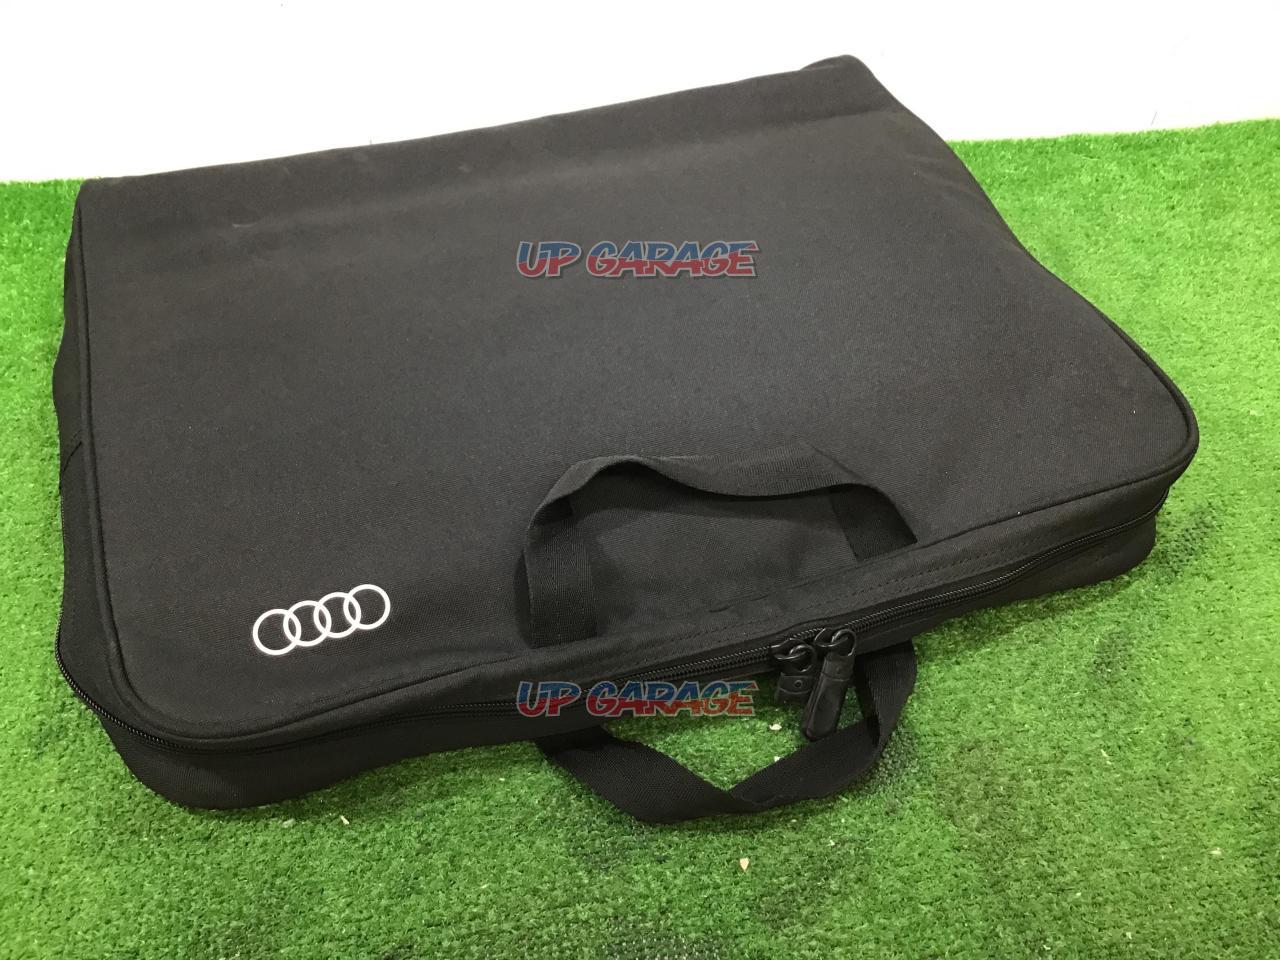 AUDI Genuine Golf Bag Used In The A5, Other Dressup Parts